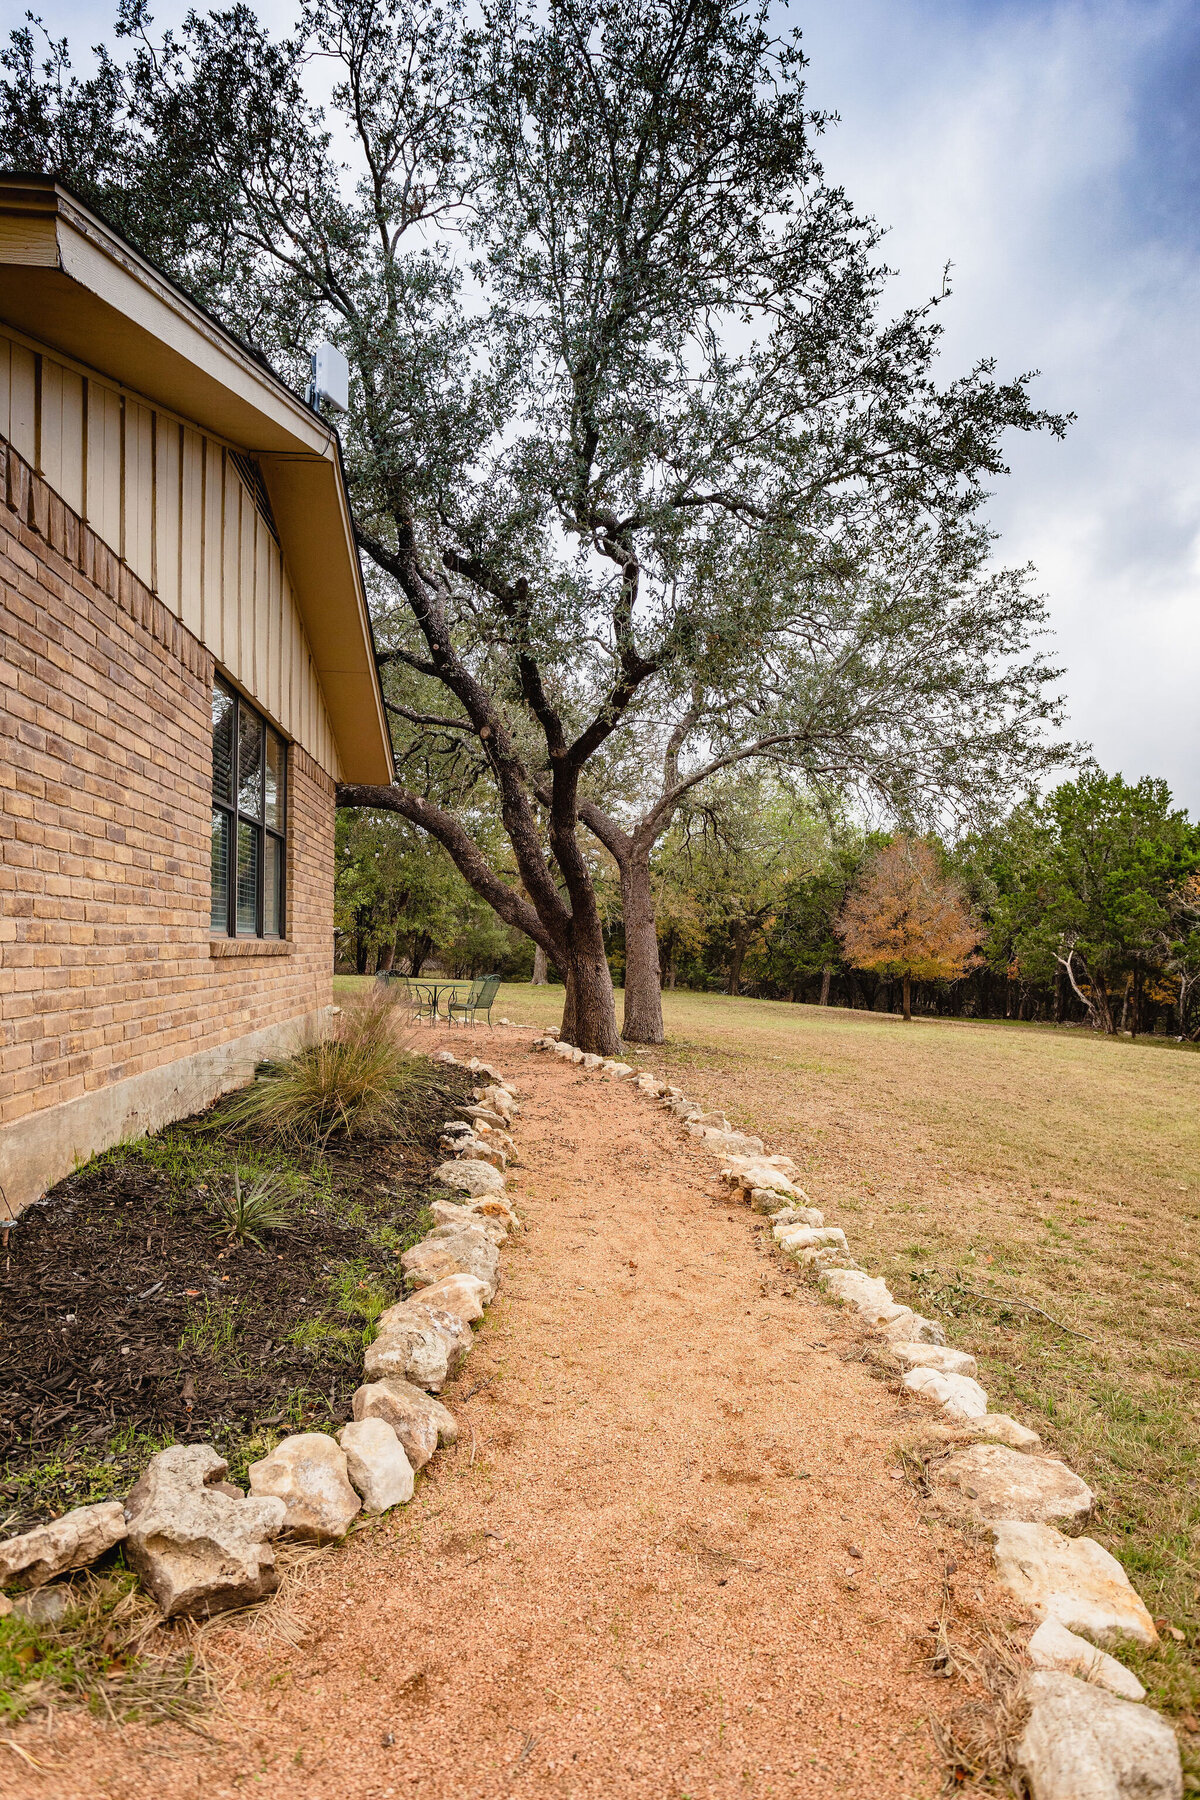 Side view of house with walking path at this three-bedroom, two-bathroom ranch house for 7 with incredible hiking, wildlife and views.